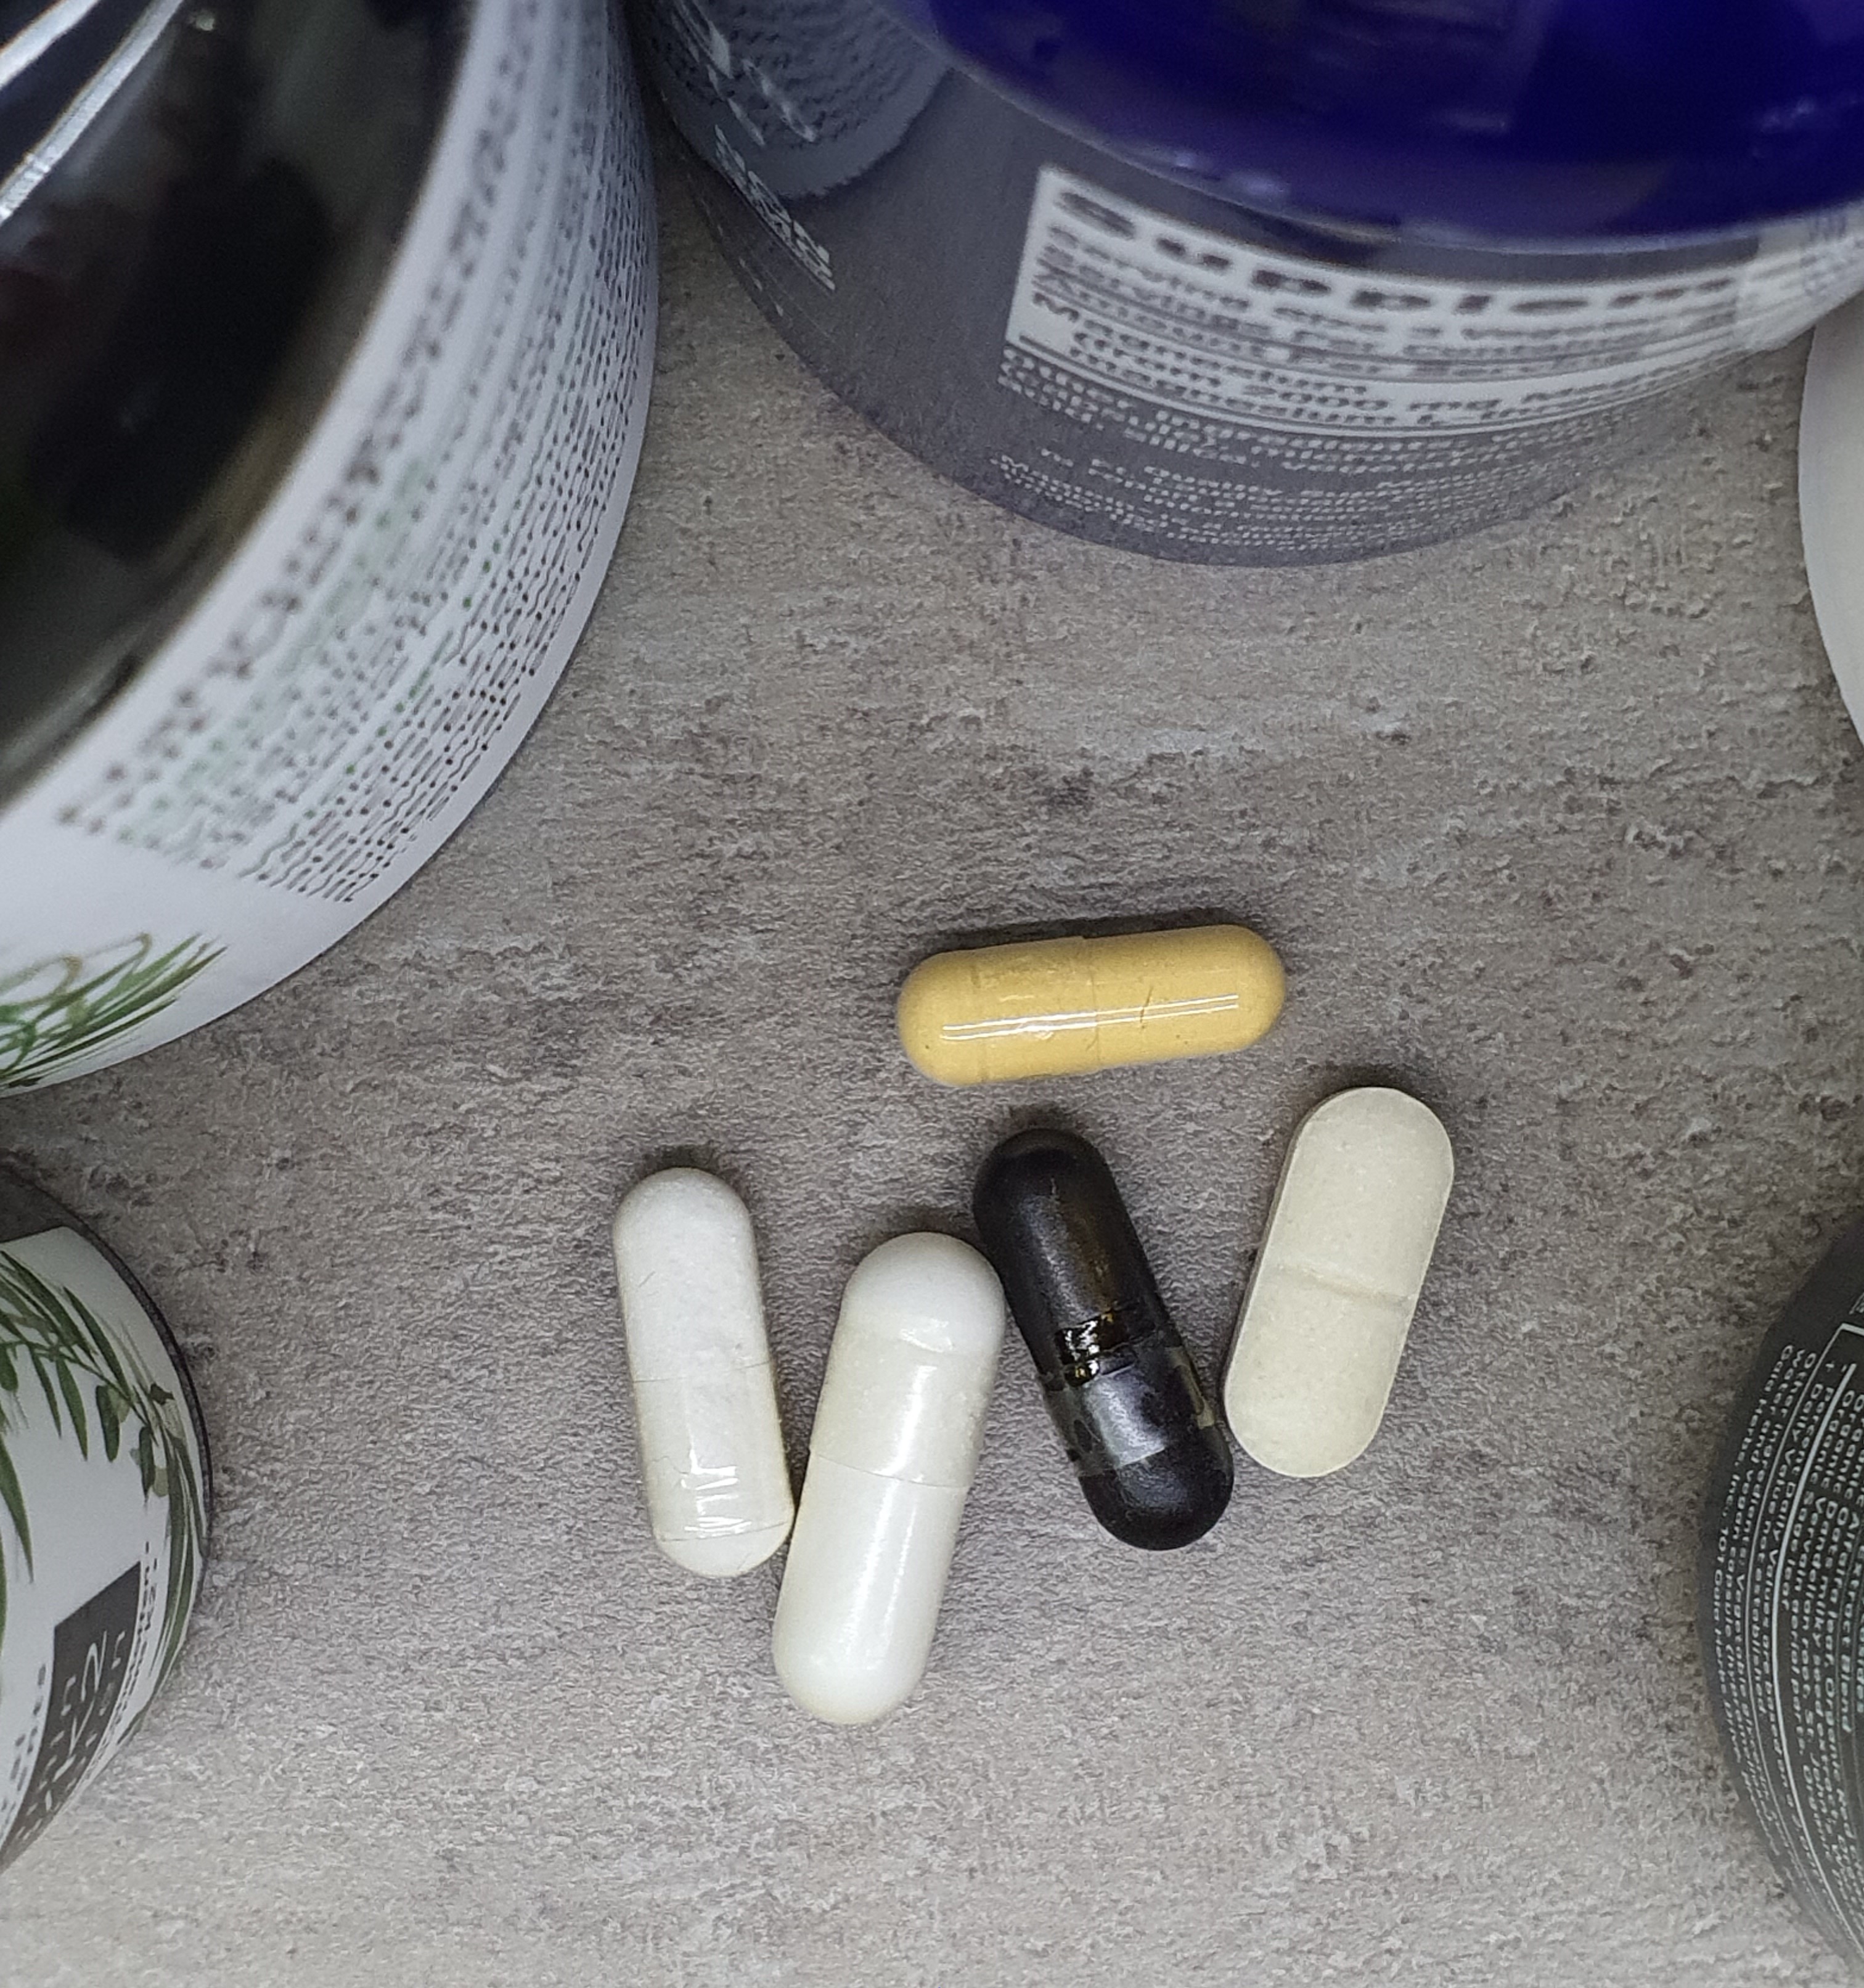  Which ingredients in nutritional supplements to avoid and why                   